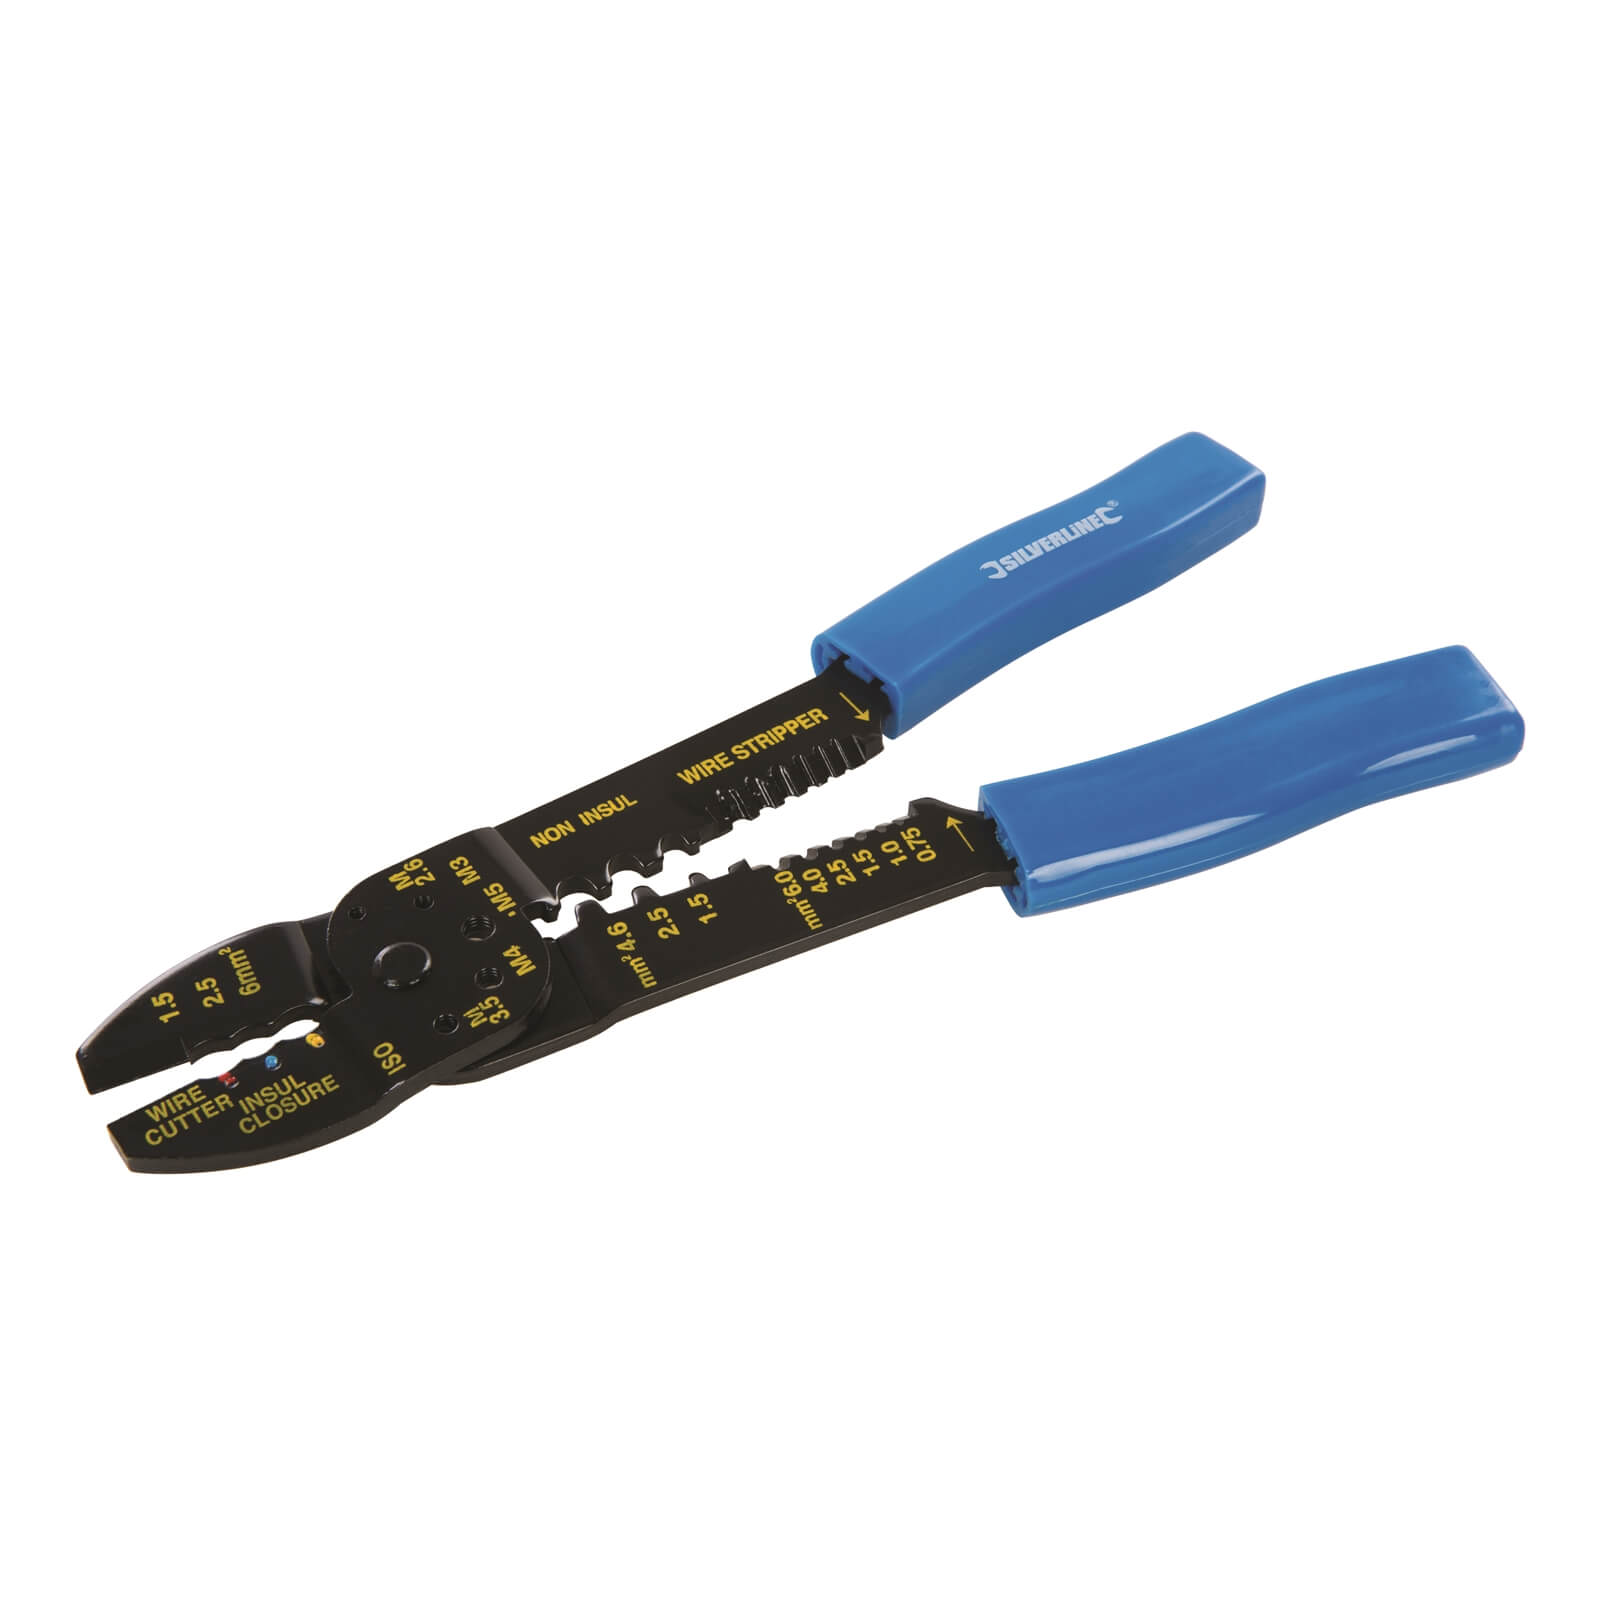 Silverline Crimping & Stripping Pliers - 230mm